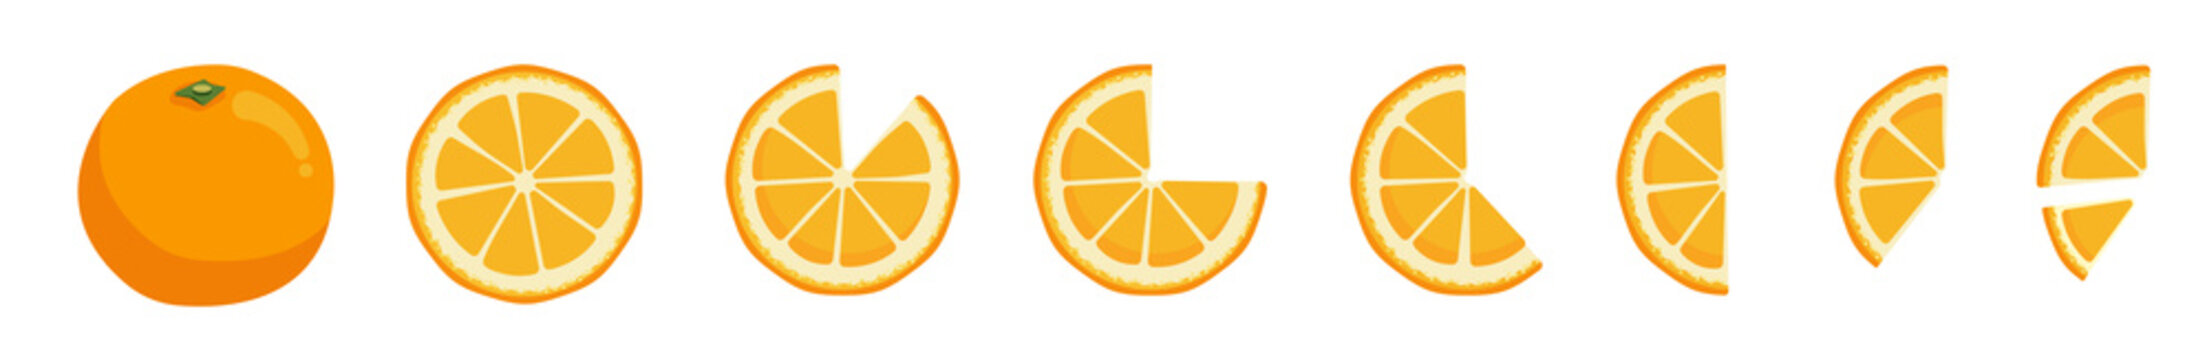 Vitamin C. Set of vector isolated elements. Bright fresh ripe juicy whole and cut orange and slices isolated on white background. Clip art for your design